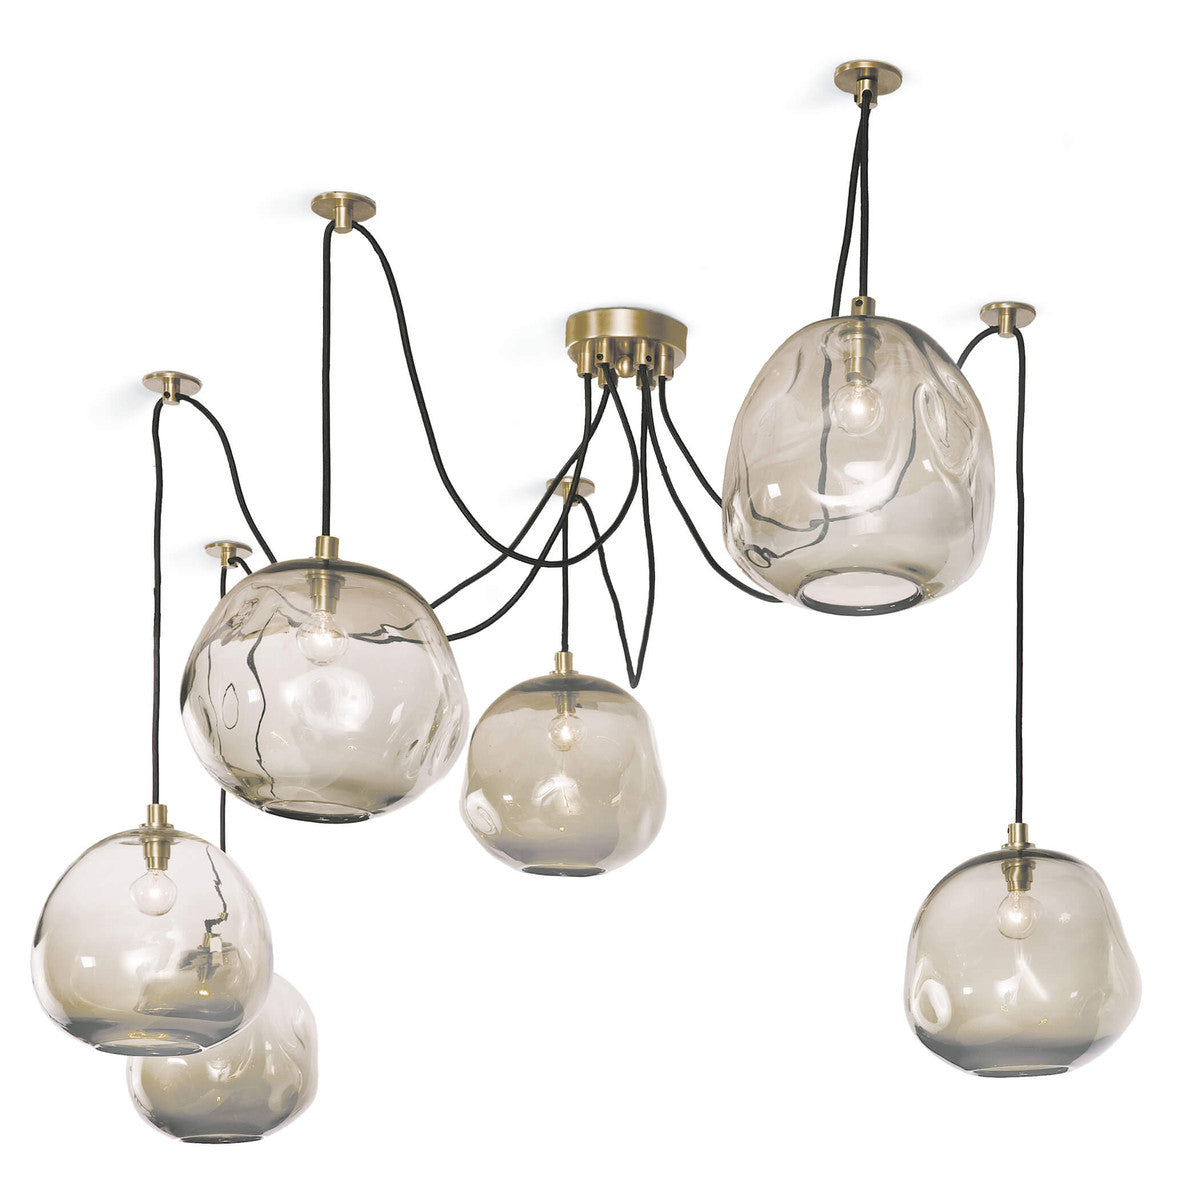 smoke grey glass orbs hanging from black cords on brass ceiling fixtures